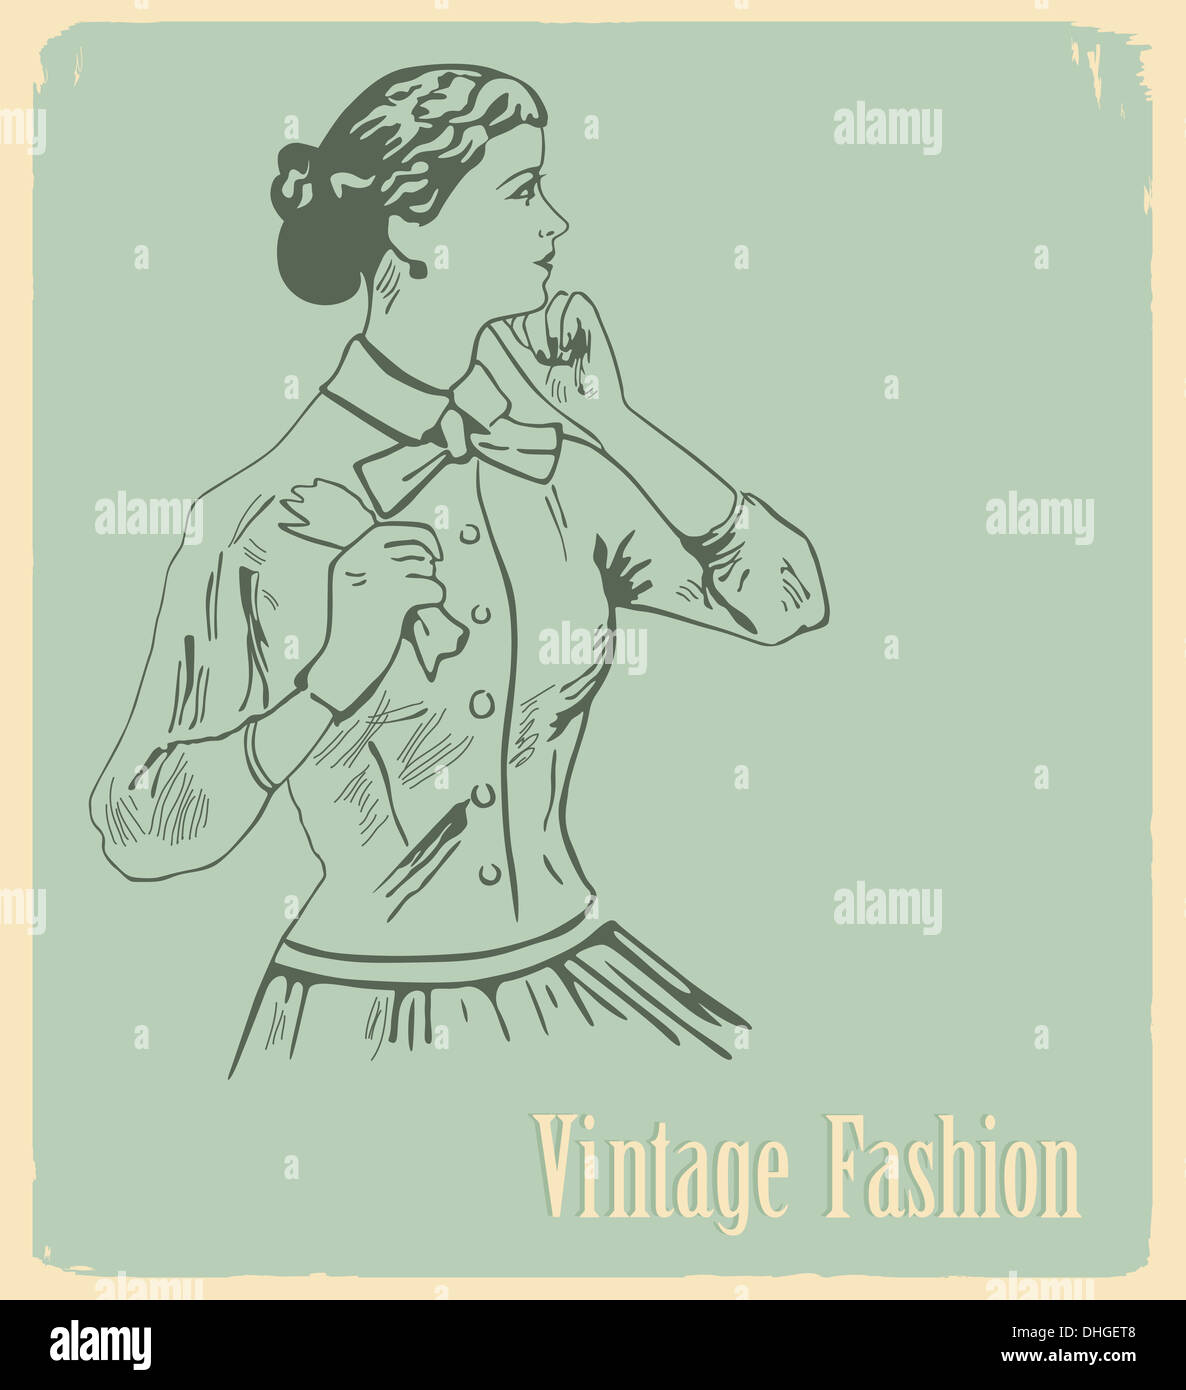 vintage illustration with the girl model Stock Photo